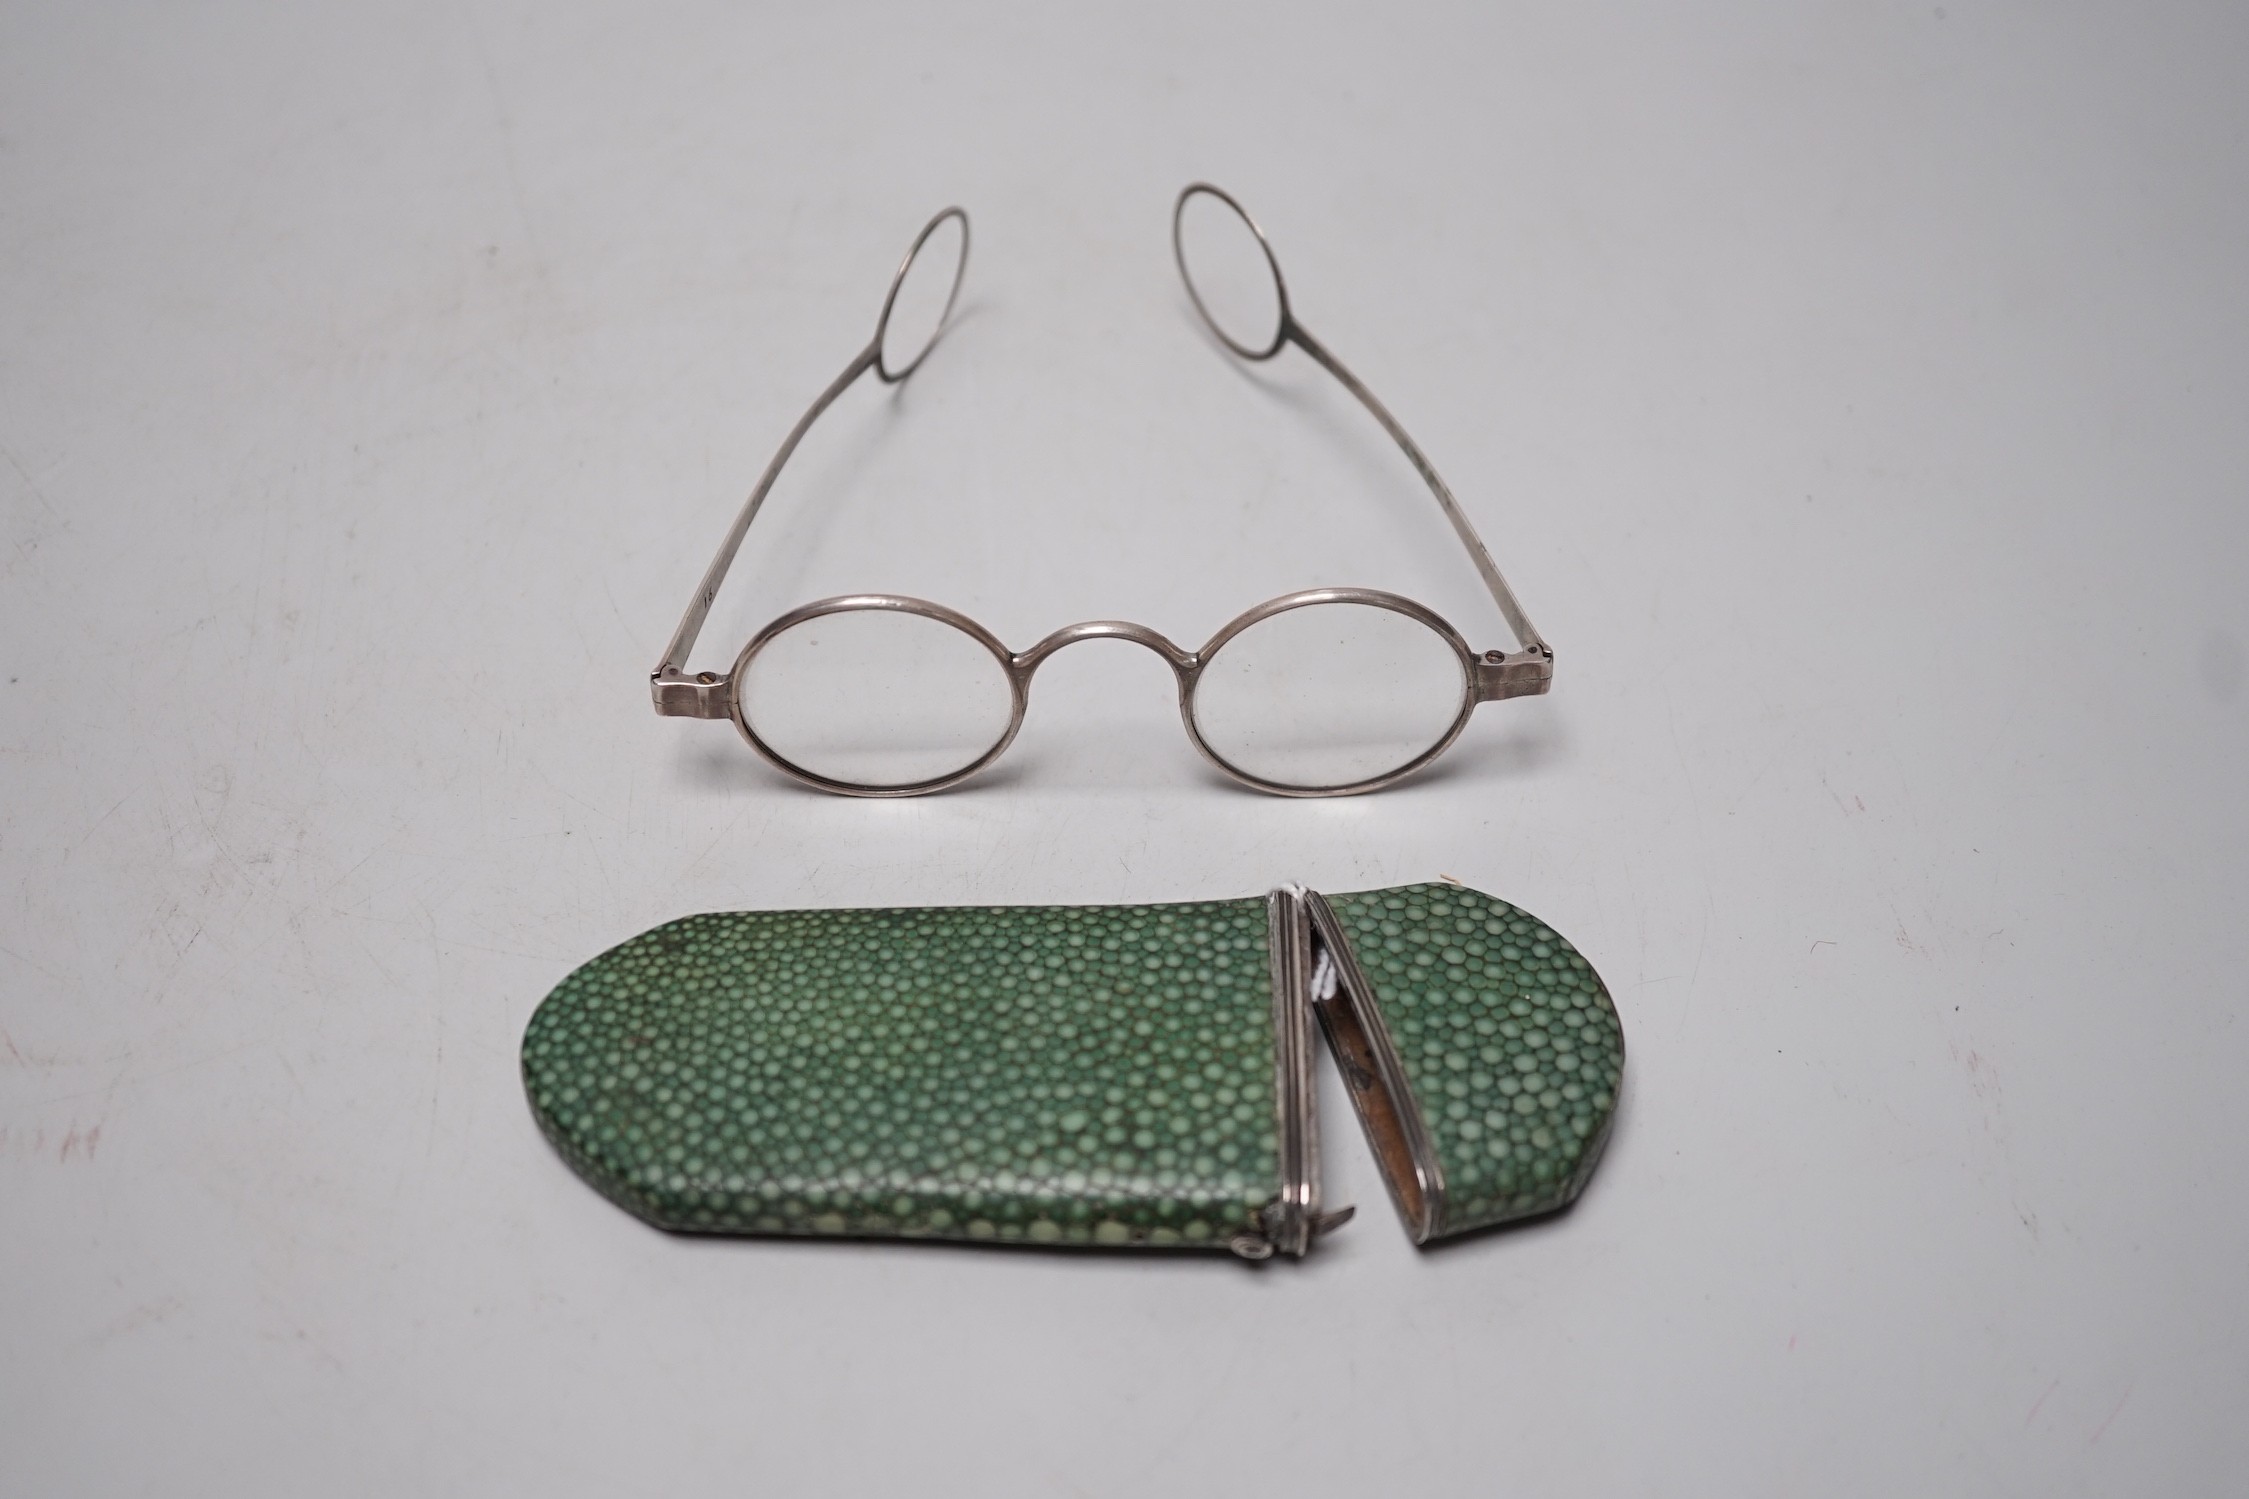 A 19th century shagreen spectacle case and spectacles